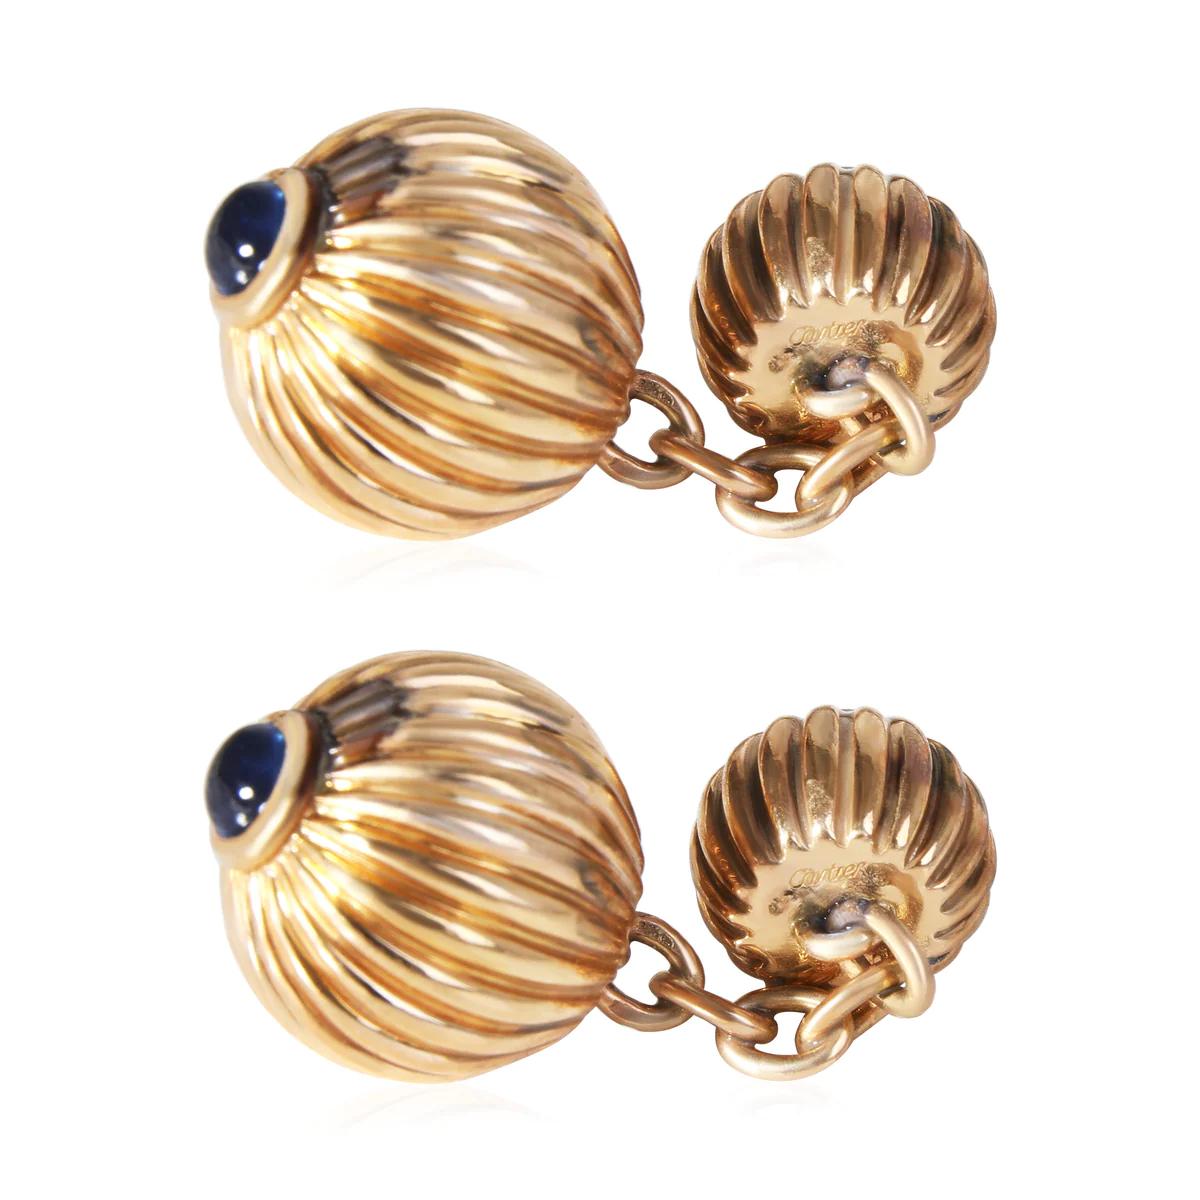 Designer: Cartier

Era: Vintage

Style: Set of Two Cufflinks

Metal: Yellow Gold

Metal Purity: 18K

Stones: Sapphires

Stone Cut: Round Shaped​​​​​​​

Total Item Weight: 13.47 g

Includes: 24 Month Brilliance Jewels Warranty
               